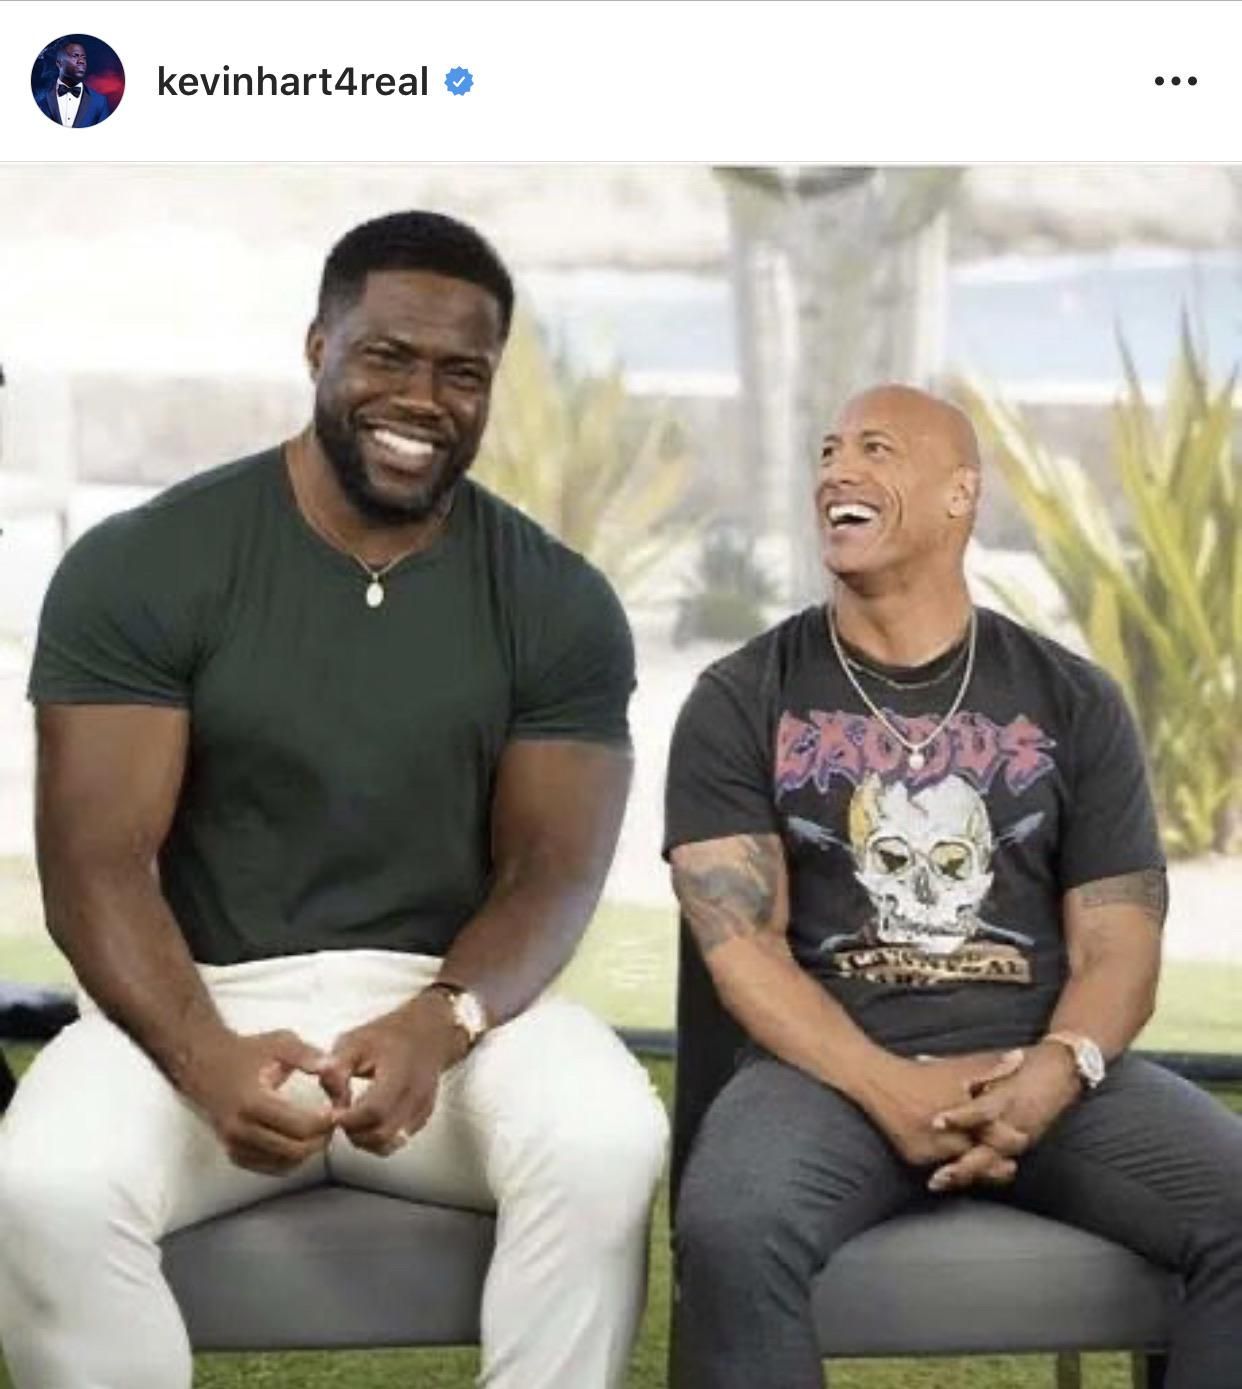 Kevin Hart uploaded this pic on his Instagram